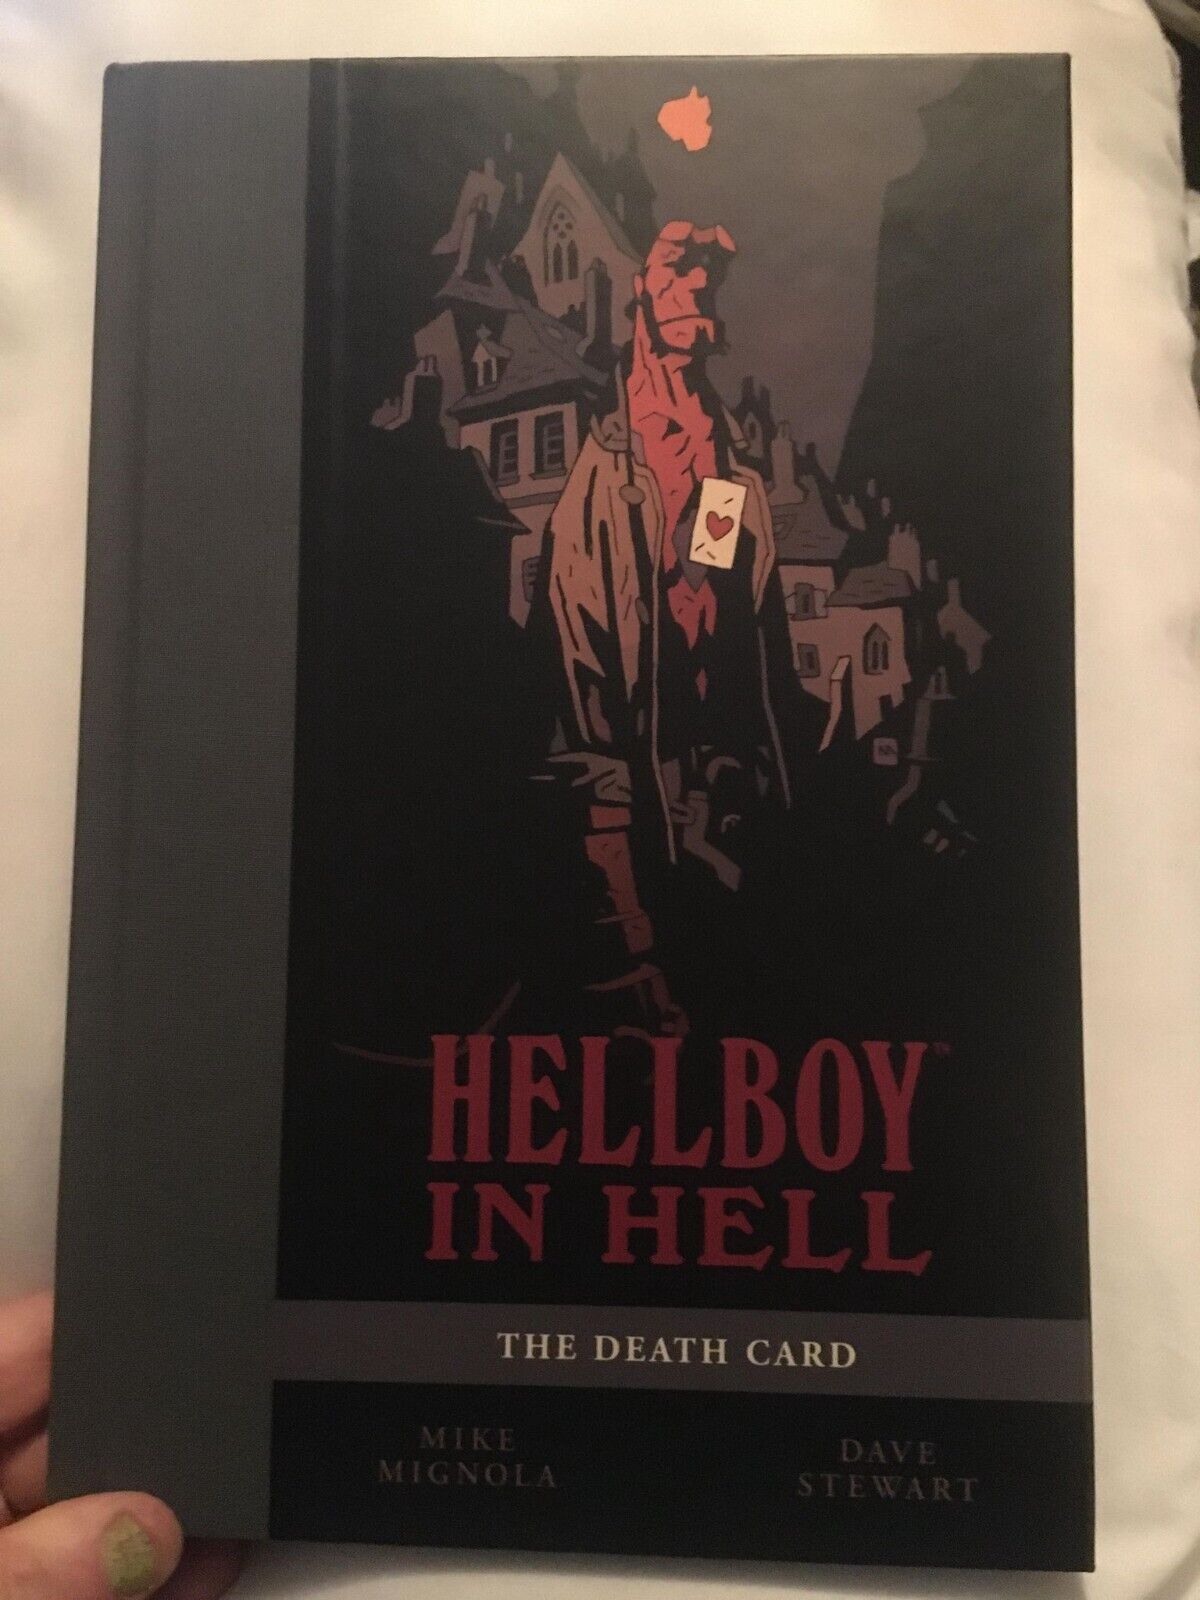 SDCC 2016 HELLBOY IN HELL THE DEATH CARD HC EXCLUSIVE HARDBACK COVER